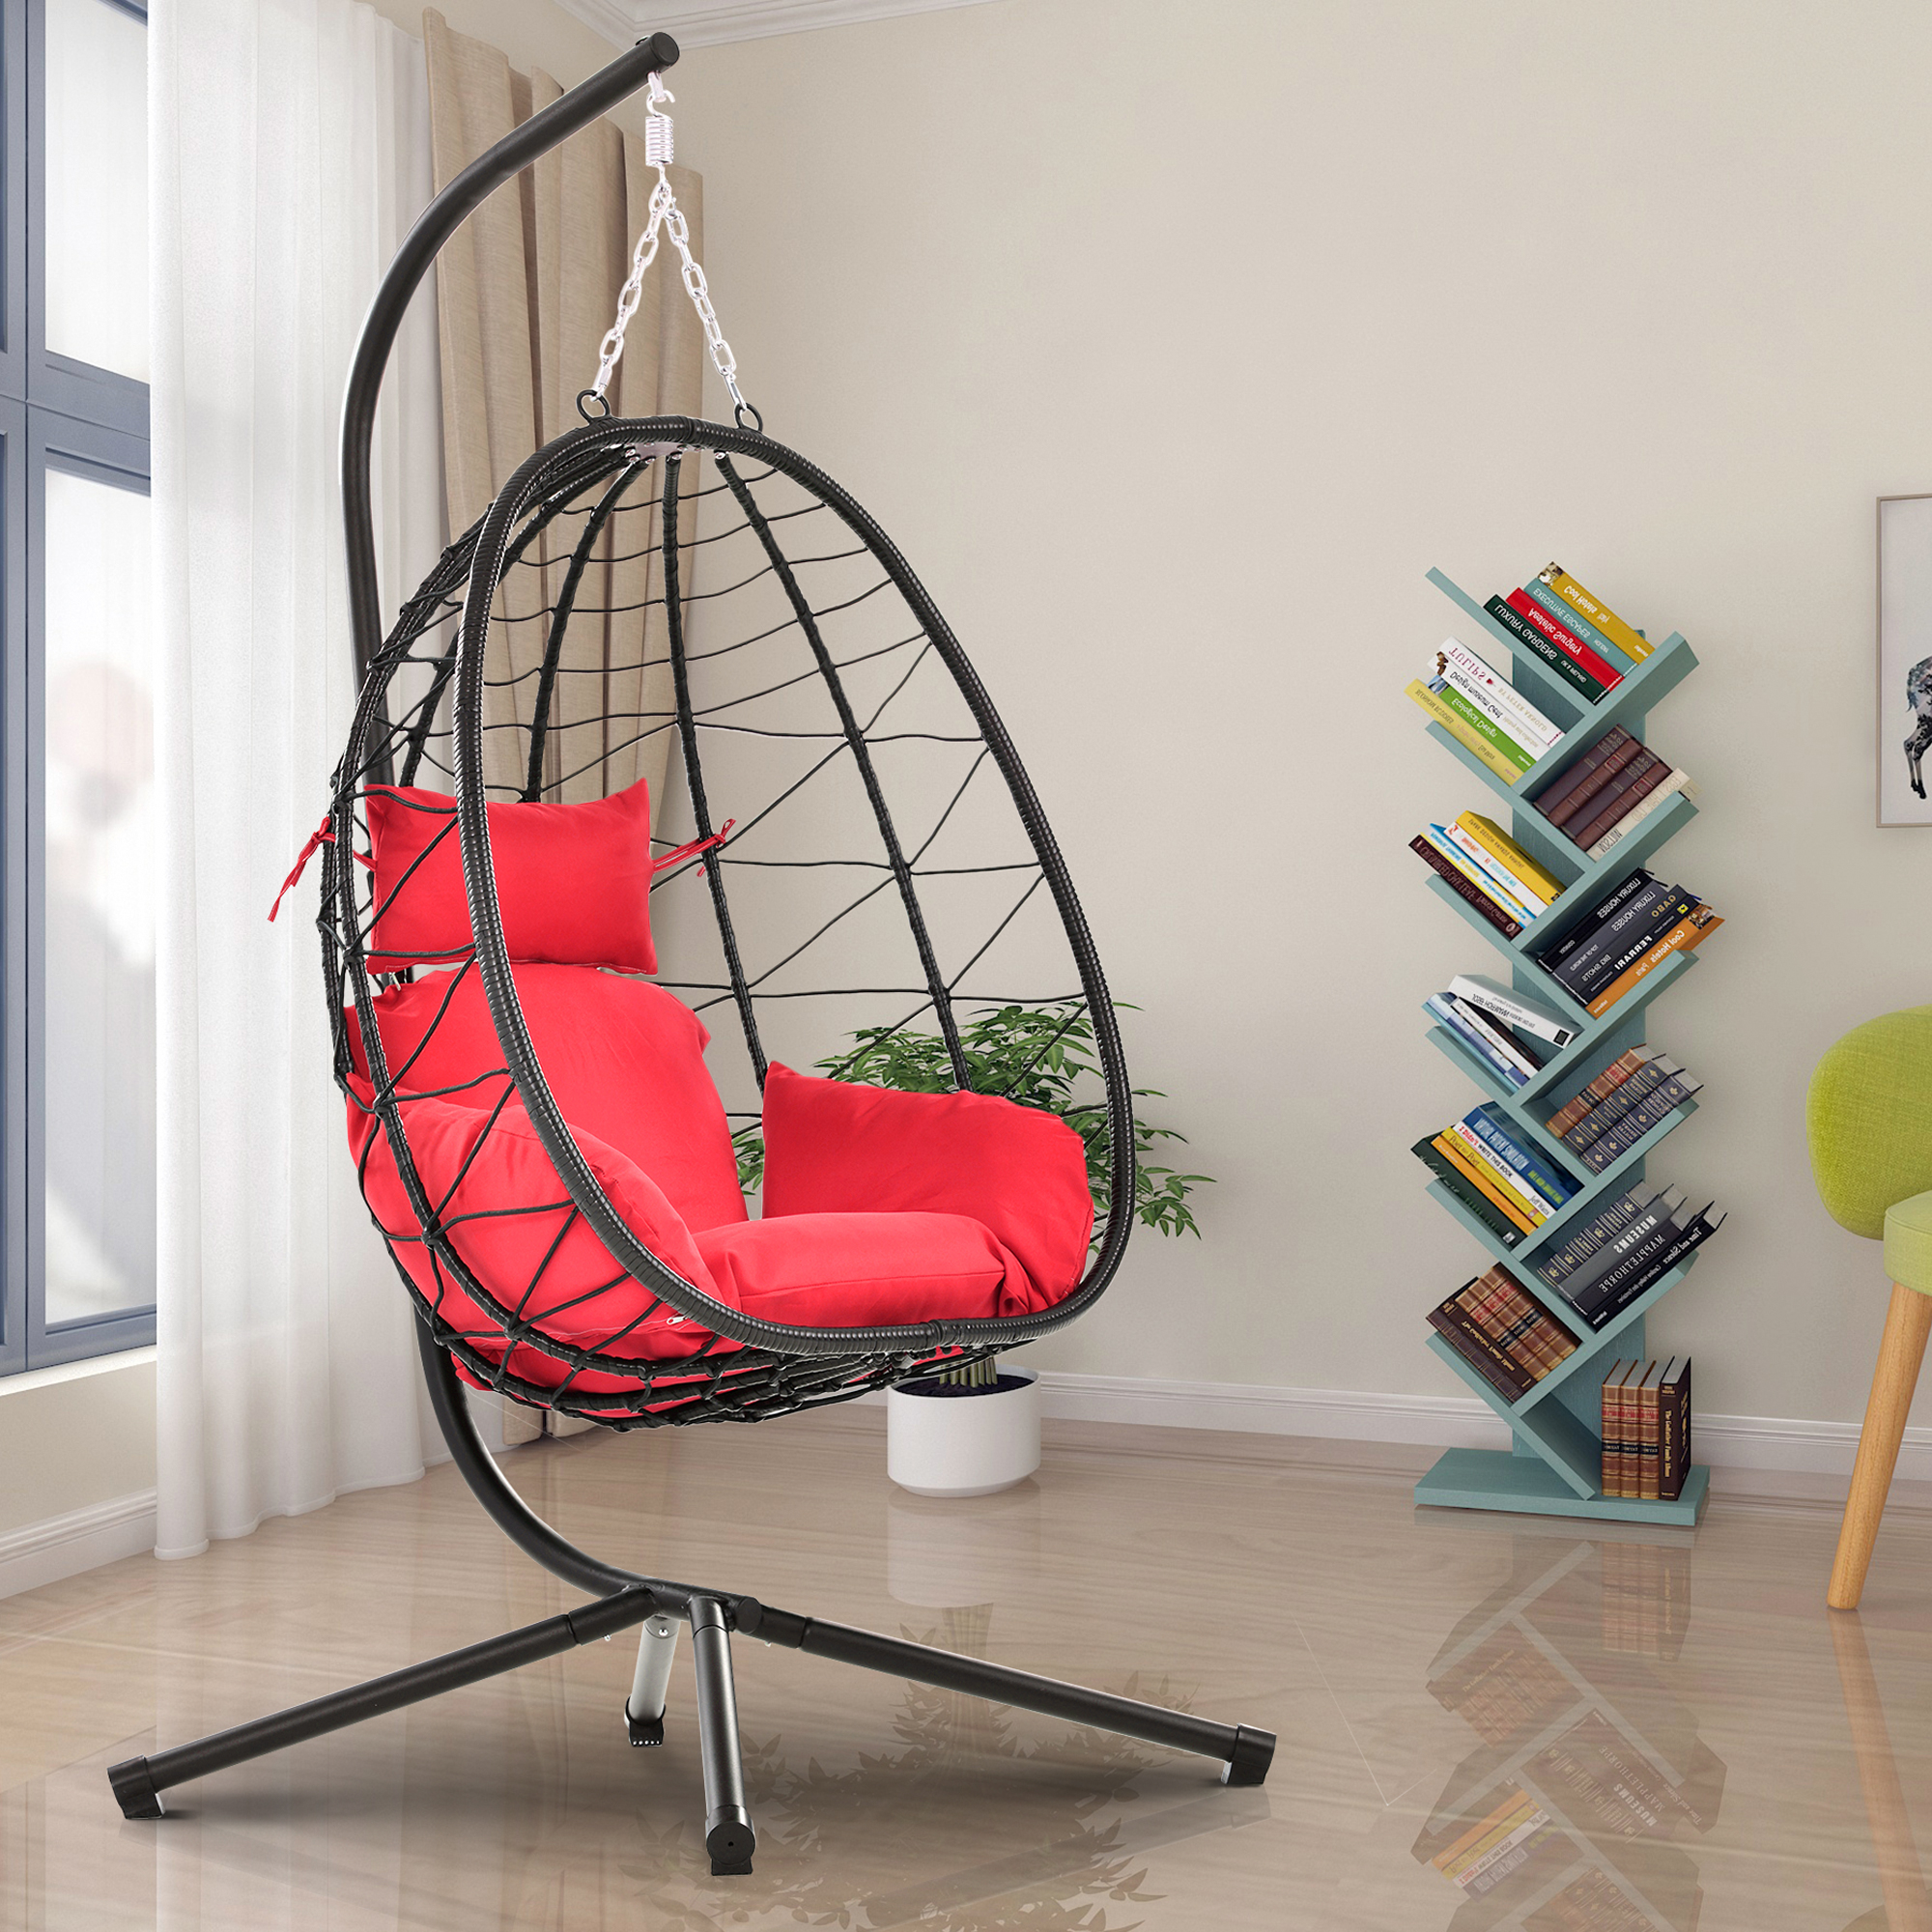 Swing Egg Chair, Outdoor Hanging Egg Chair with Stand, Wicker Swing Chair w/ Seat and Back Cushion, All-Weather UV Rattan Lounge Chair for Livingroom, Patio, Deck, Yard, Garden, 350lbs, Red, SS1954 - image 1 of 9